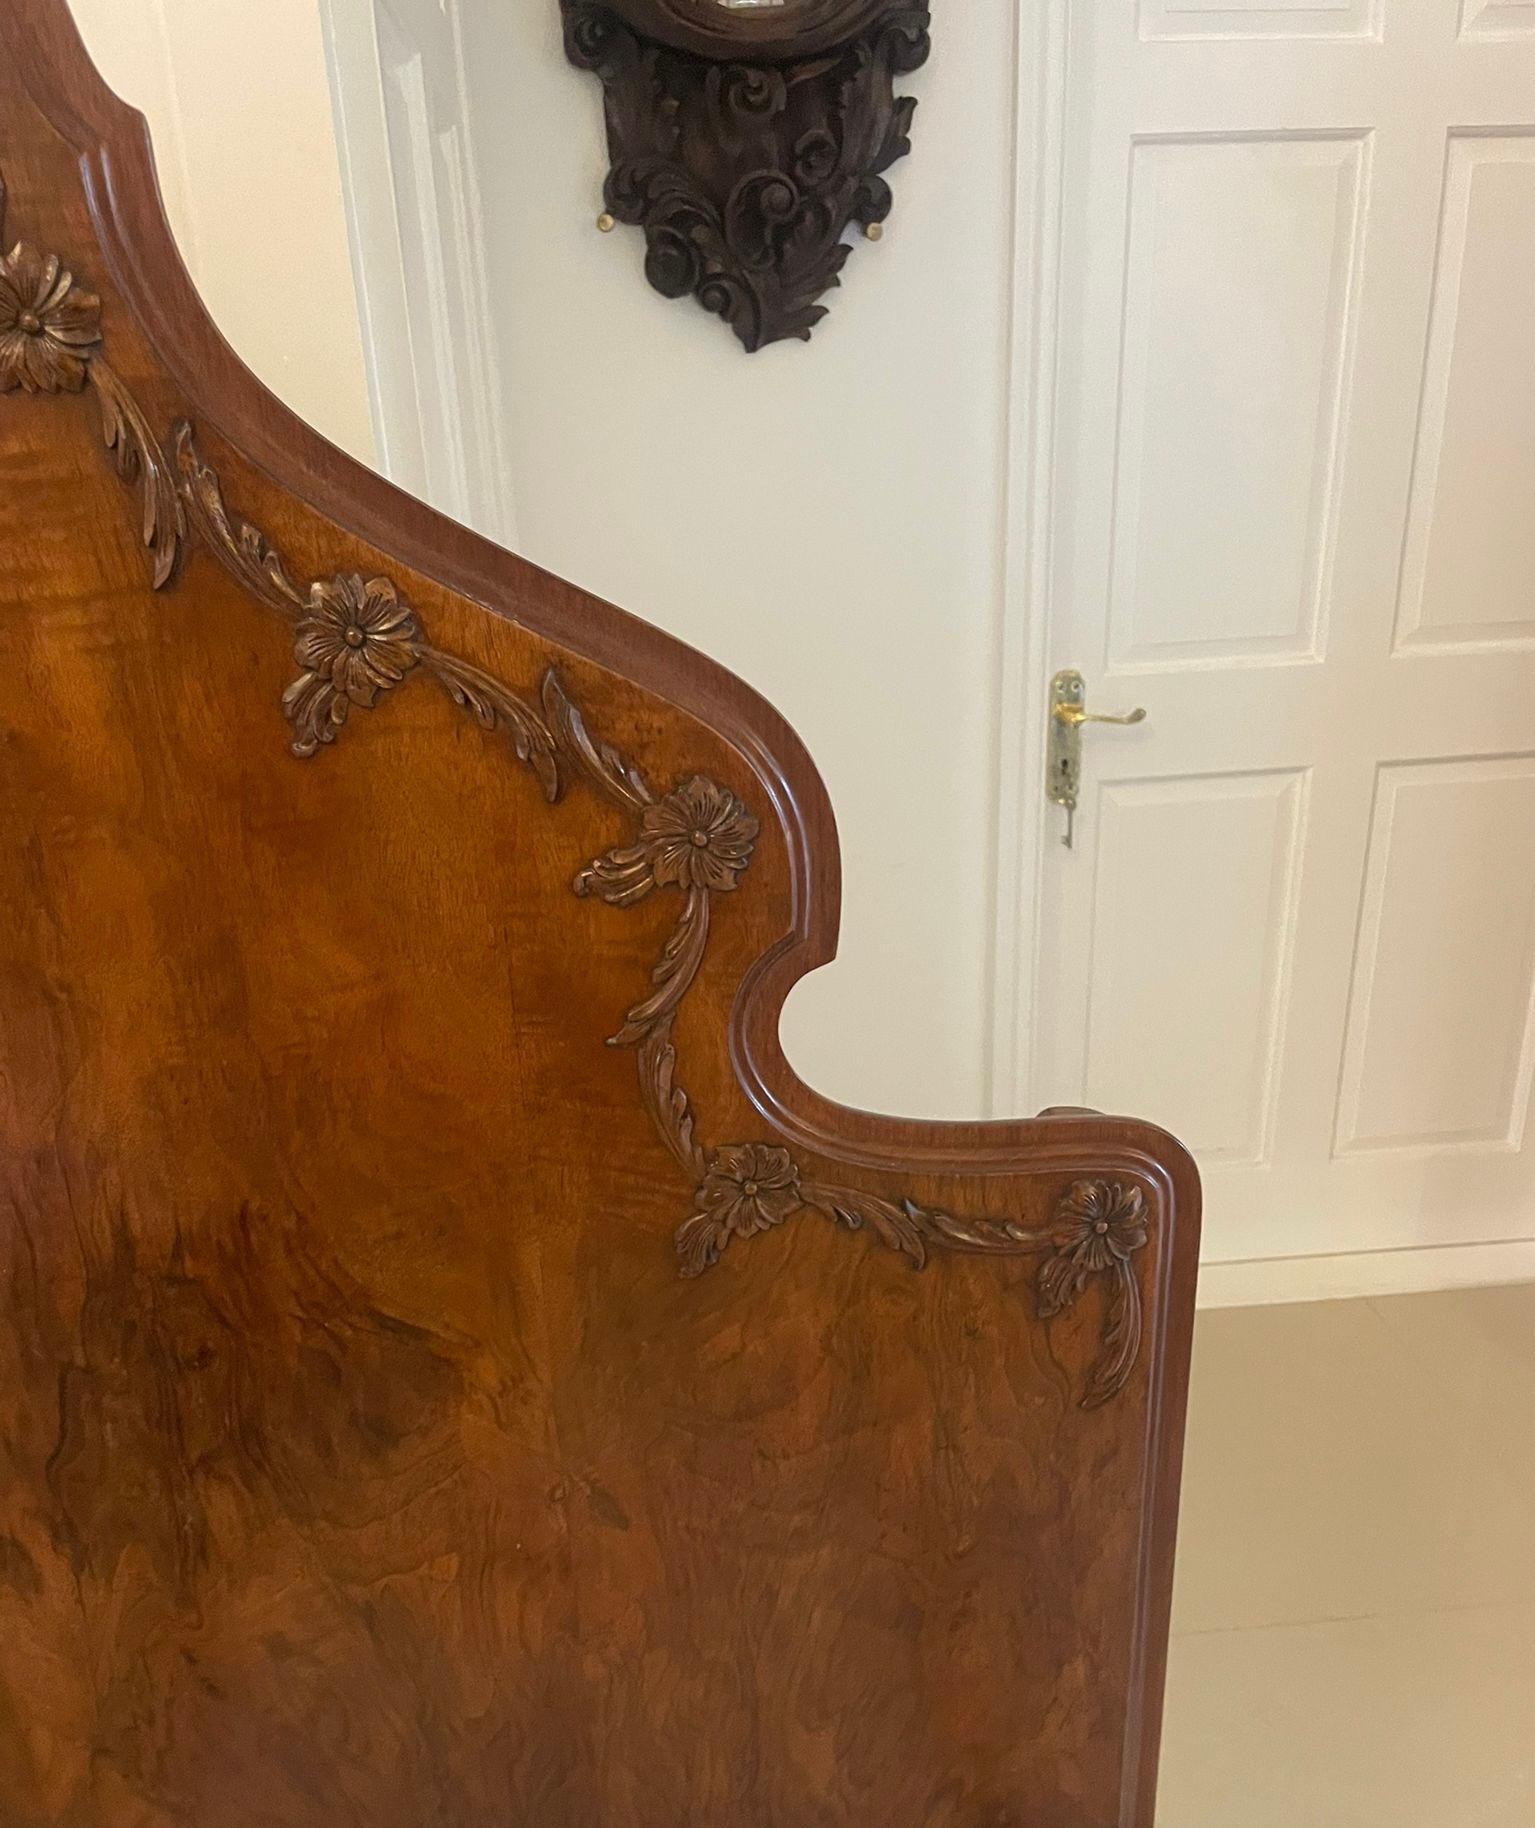 Antique pair of fine quality carved burr walnut single beds in the Queen Anne style having attractive shaped burr walnut headboards with fantastic quality leaf and foliage carving. The footboards have carved solid walnut shaped scrolls each side and